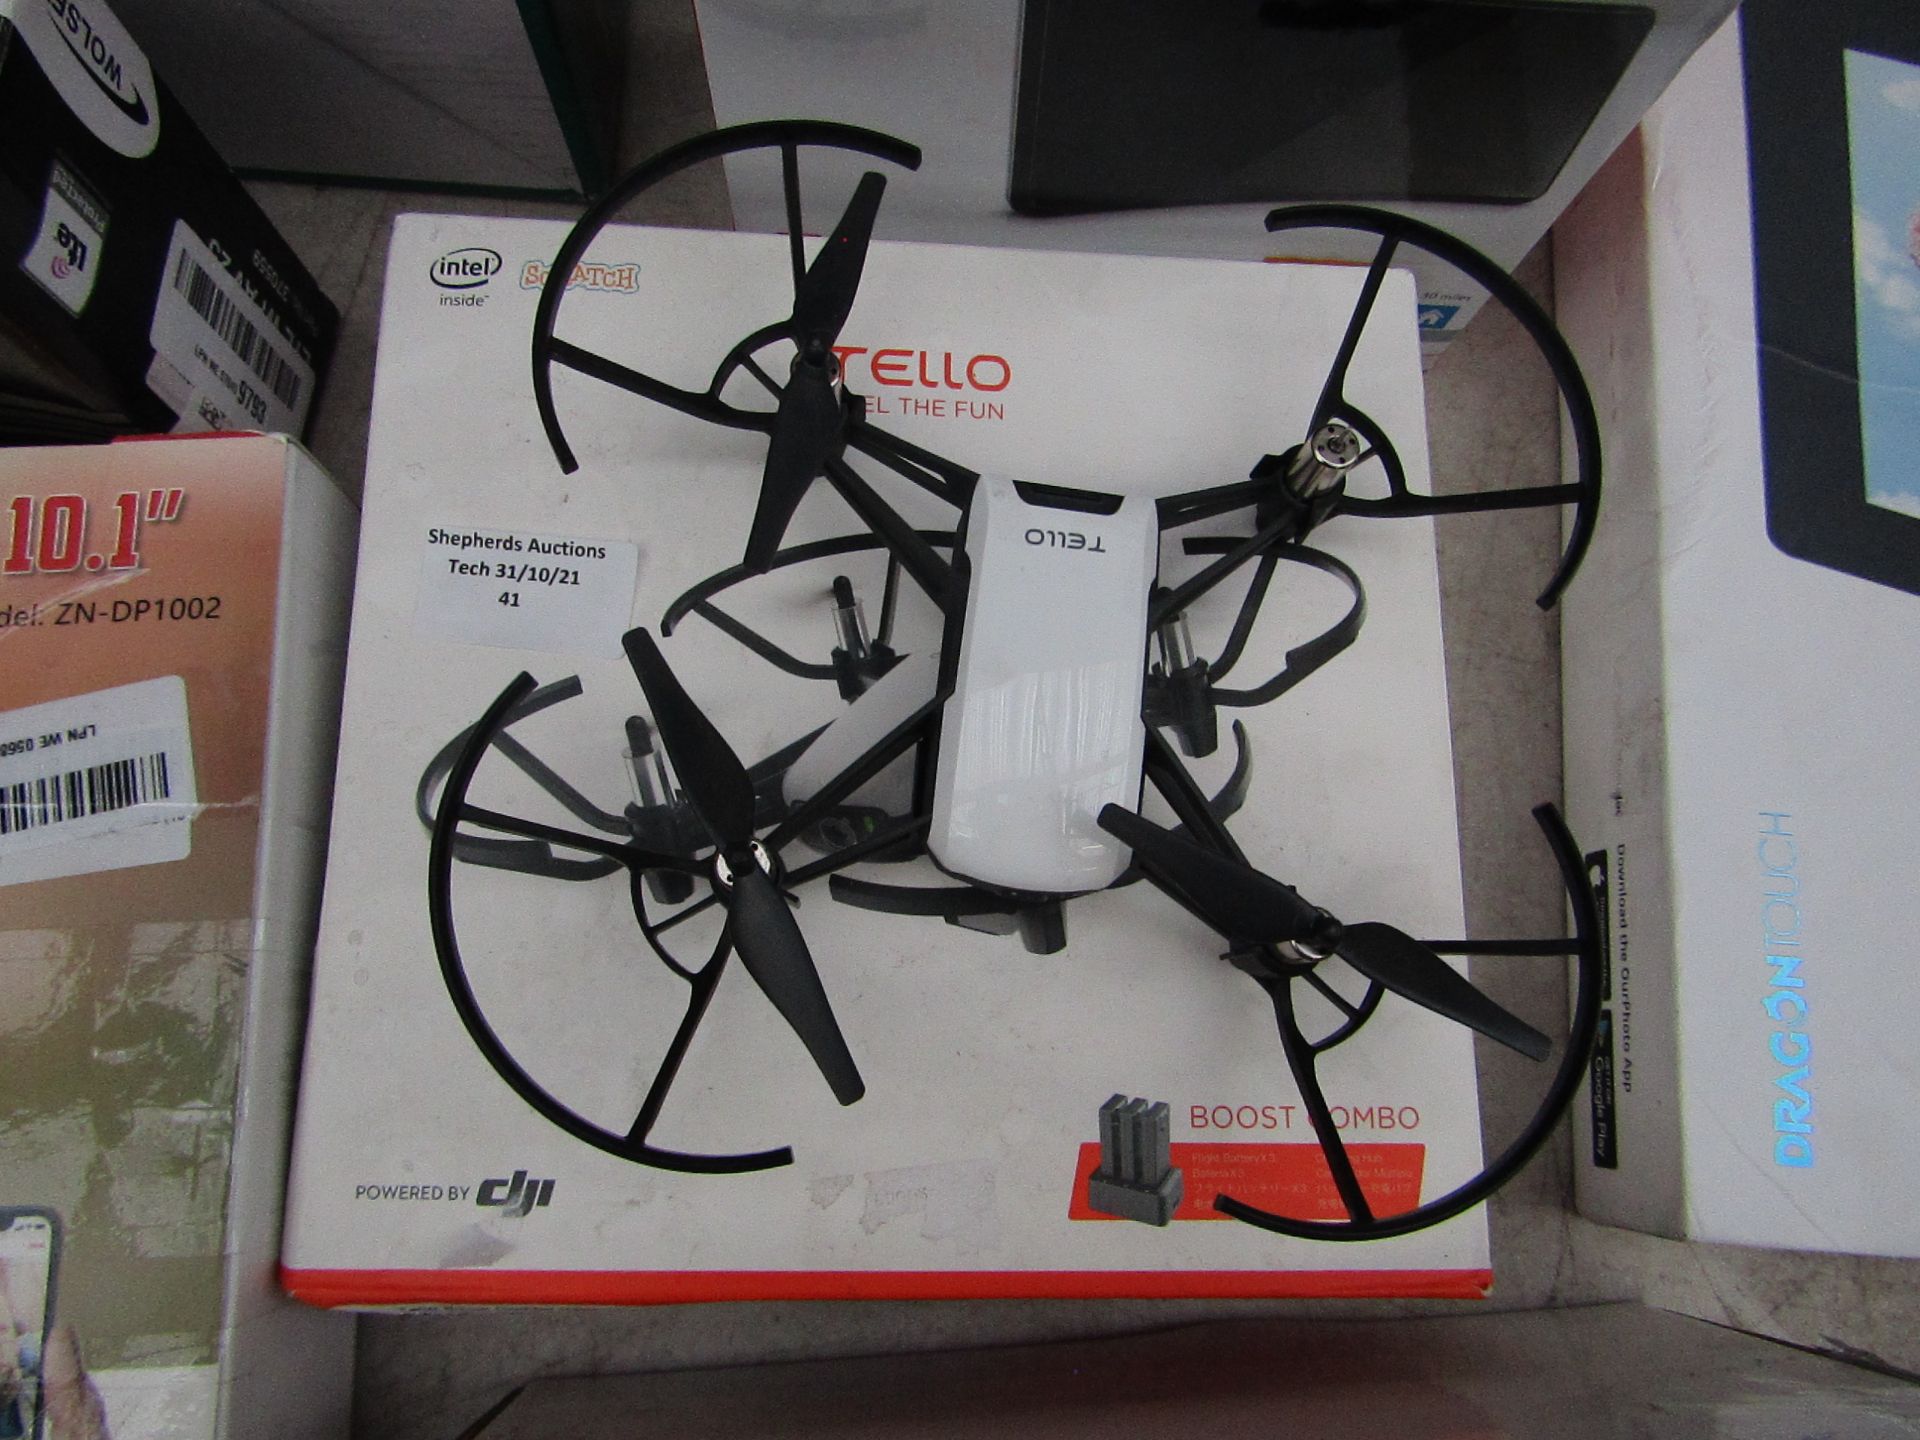 Tello Boost Combo Drone - Untested & Boxed - Missing Propellor but spare in box - RRP £99